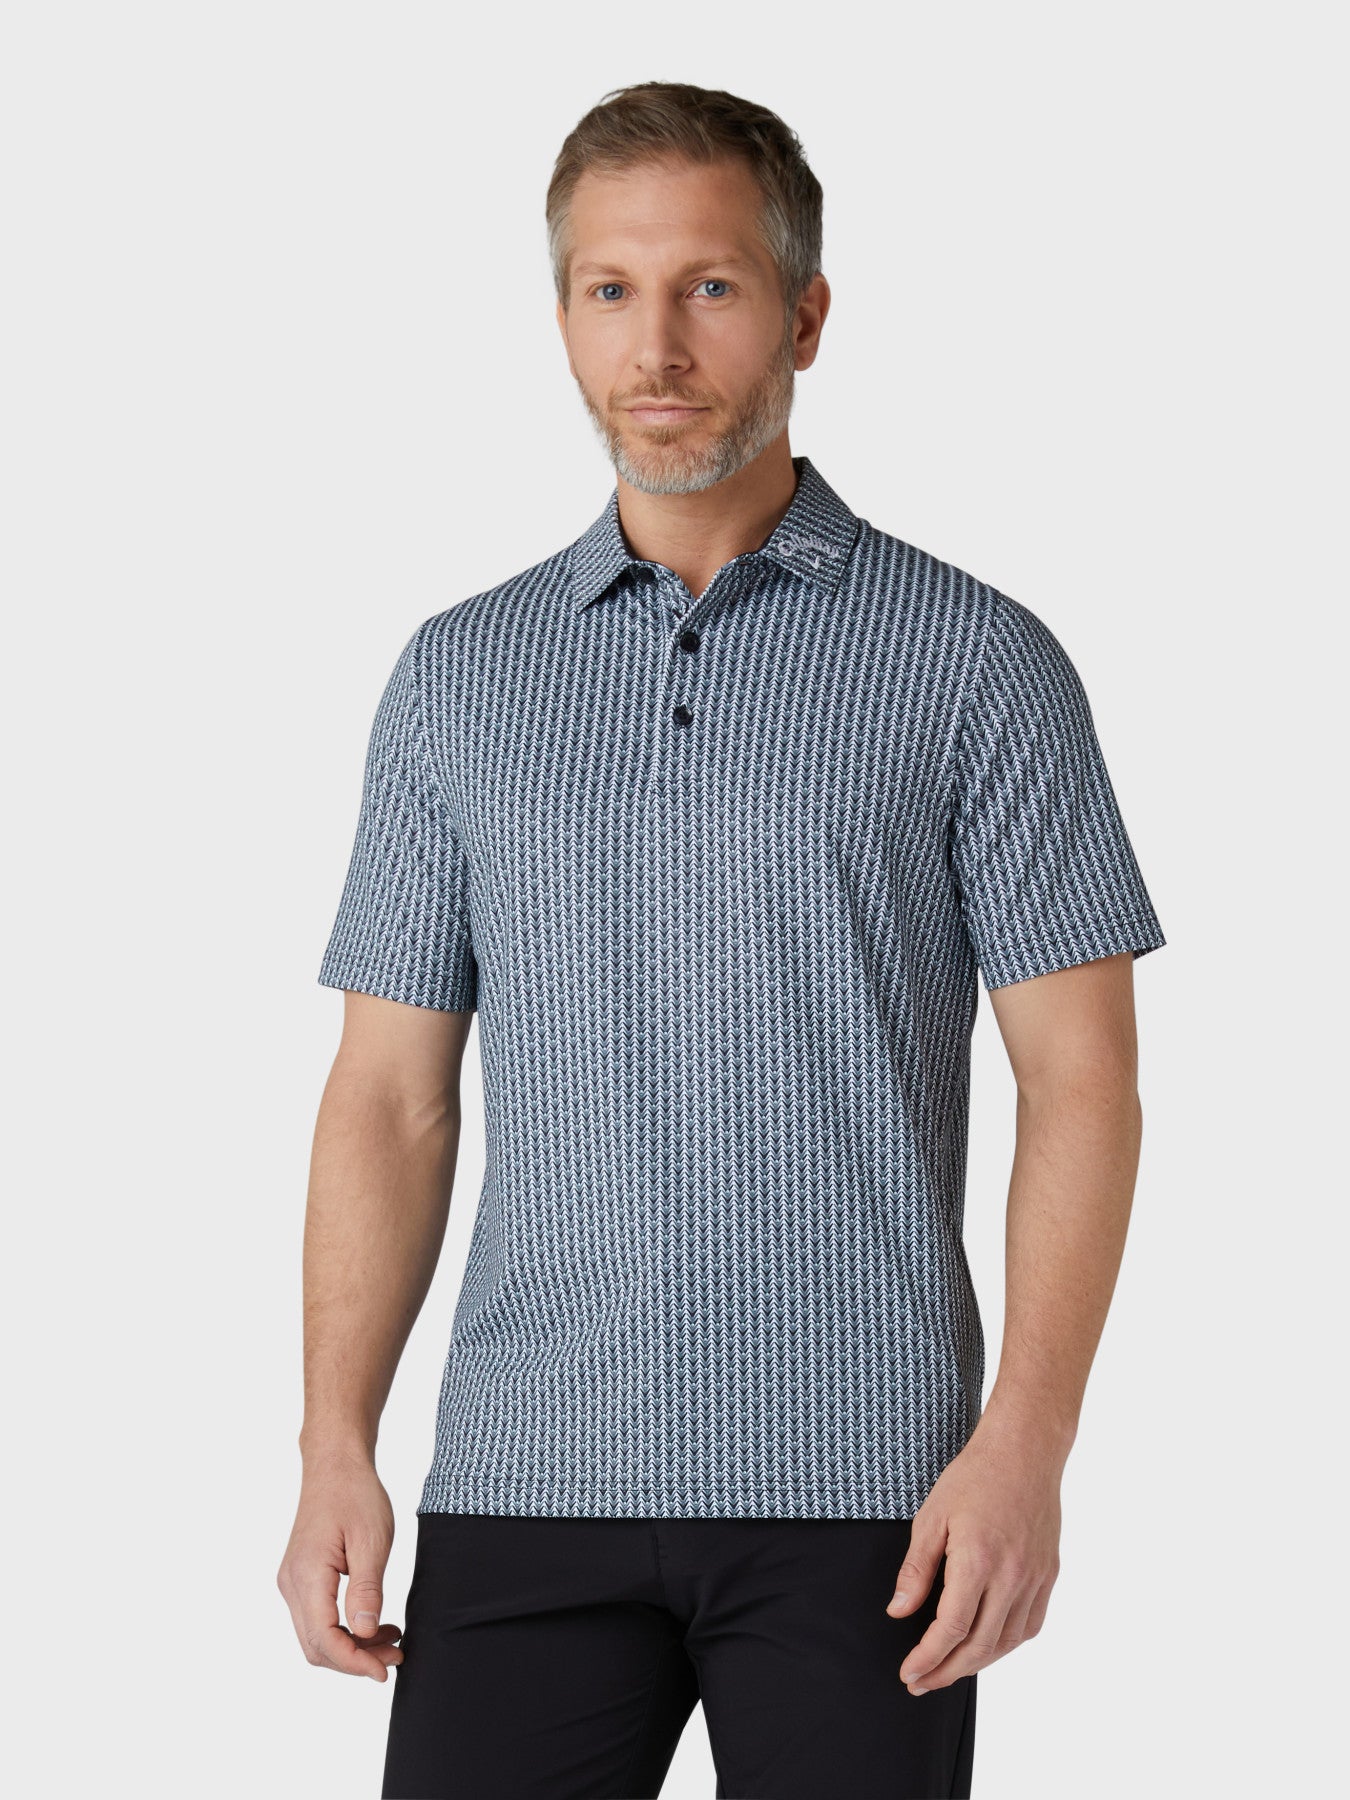 View Mens Chev And Ball All Over Print Polo In Caviar Caviar XL information